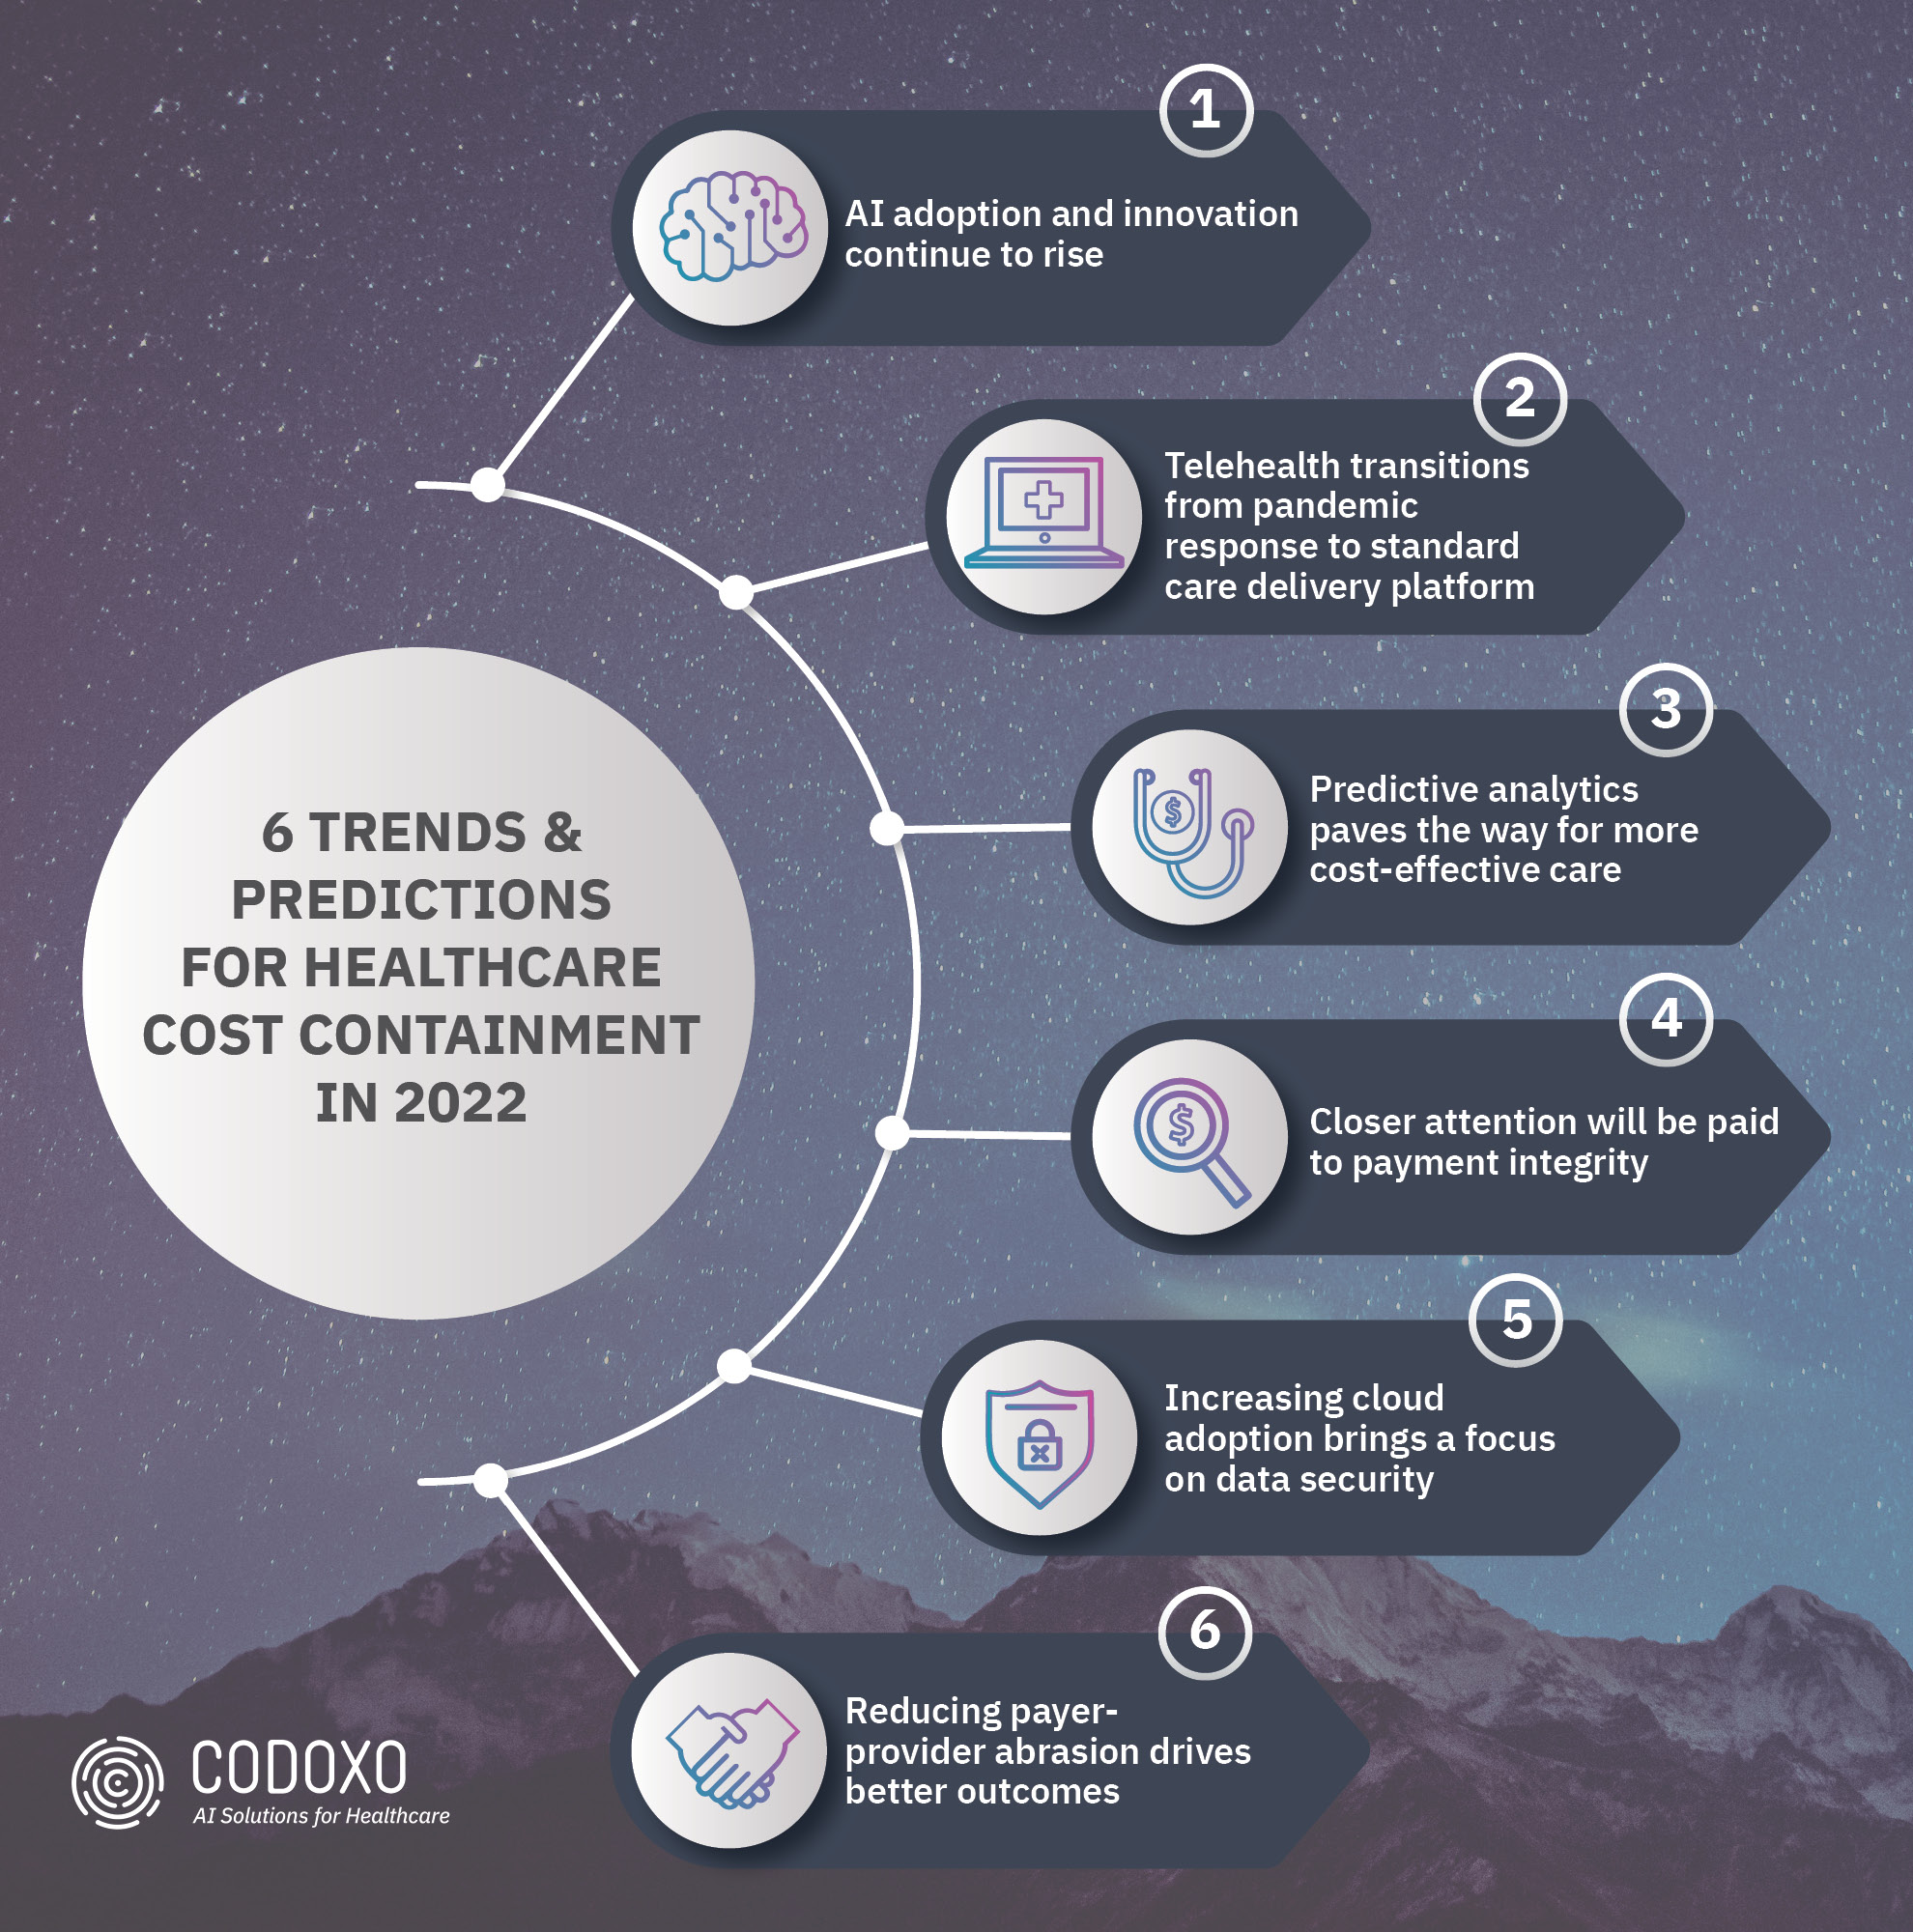 6 Trends & Predictions for Healthcare Cost Containment in 2022